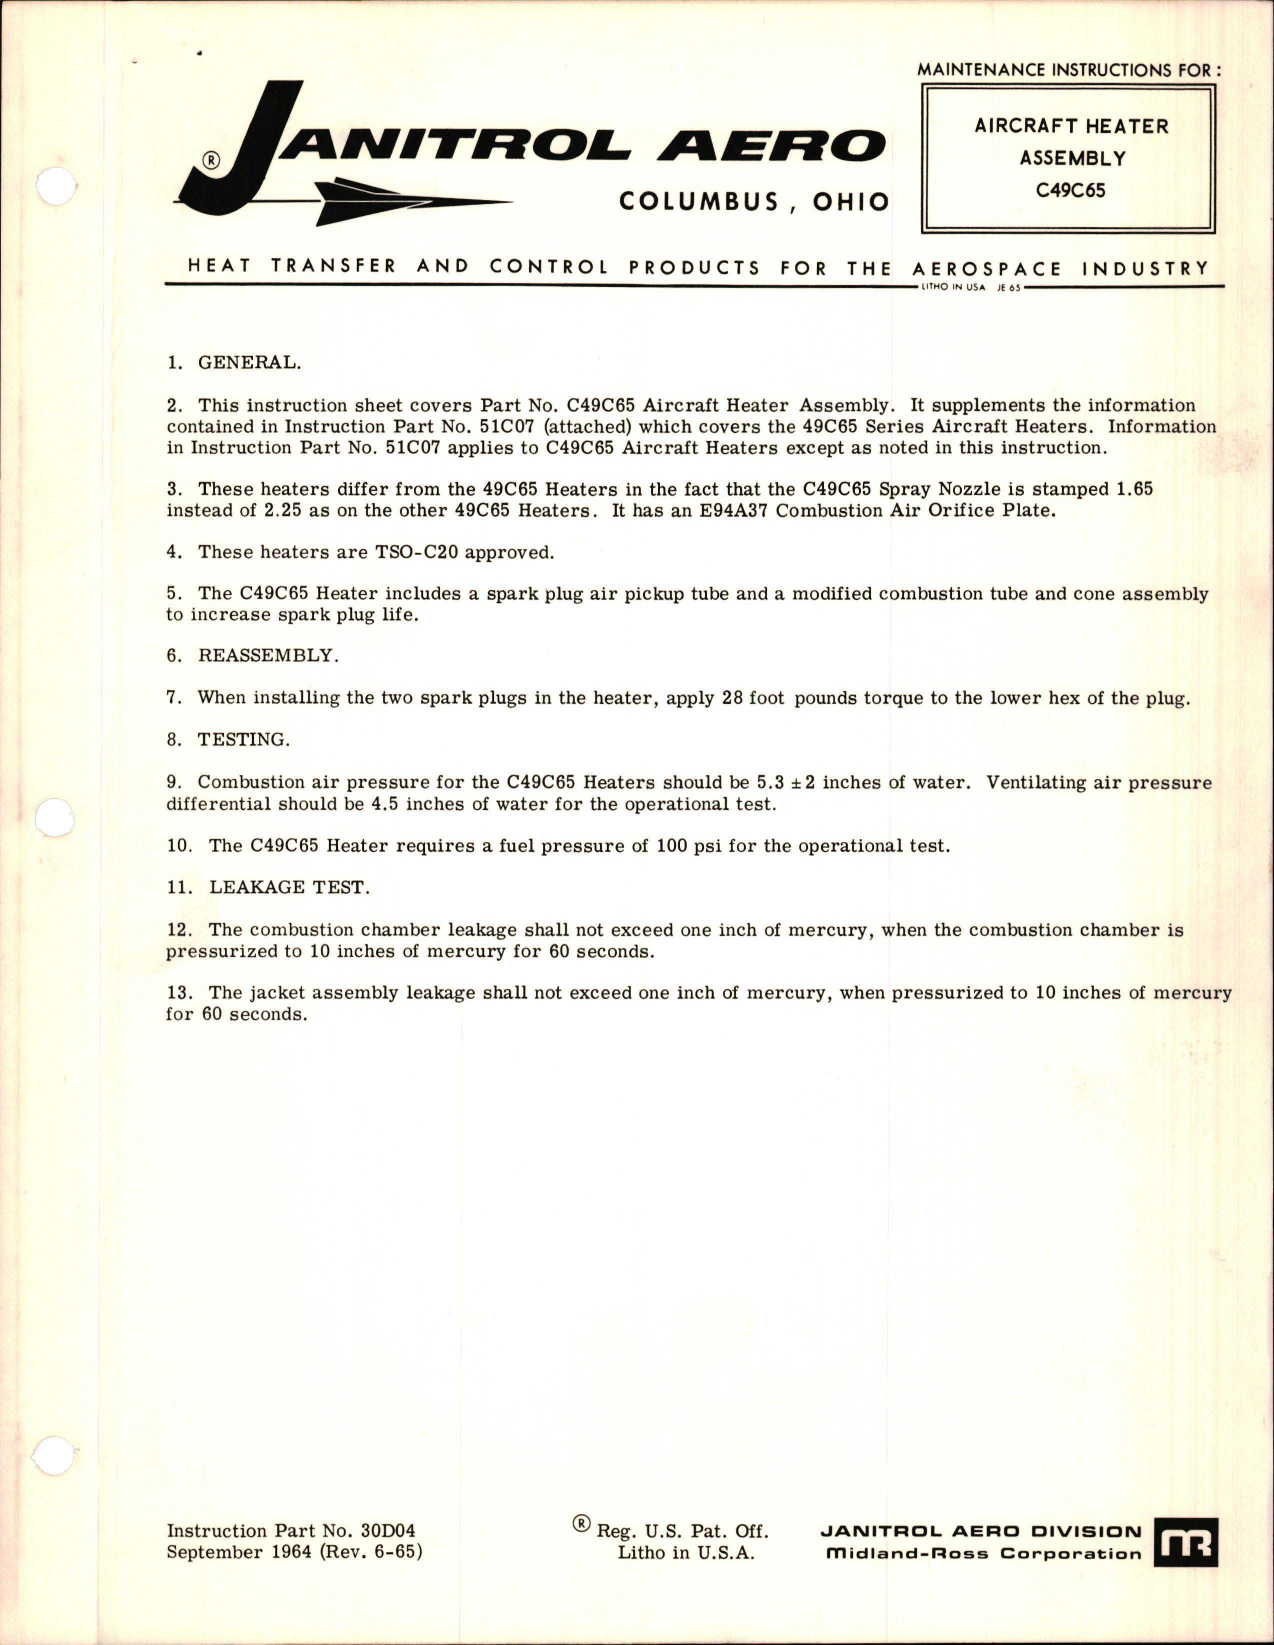 Sample page 1 from AirCorps Library document: Maintenance Instructions for Aircraft Heater Assembly - C49C65